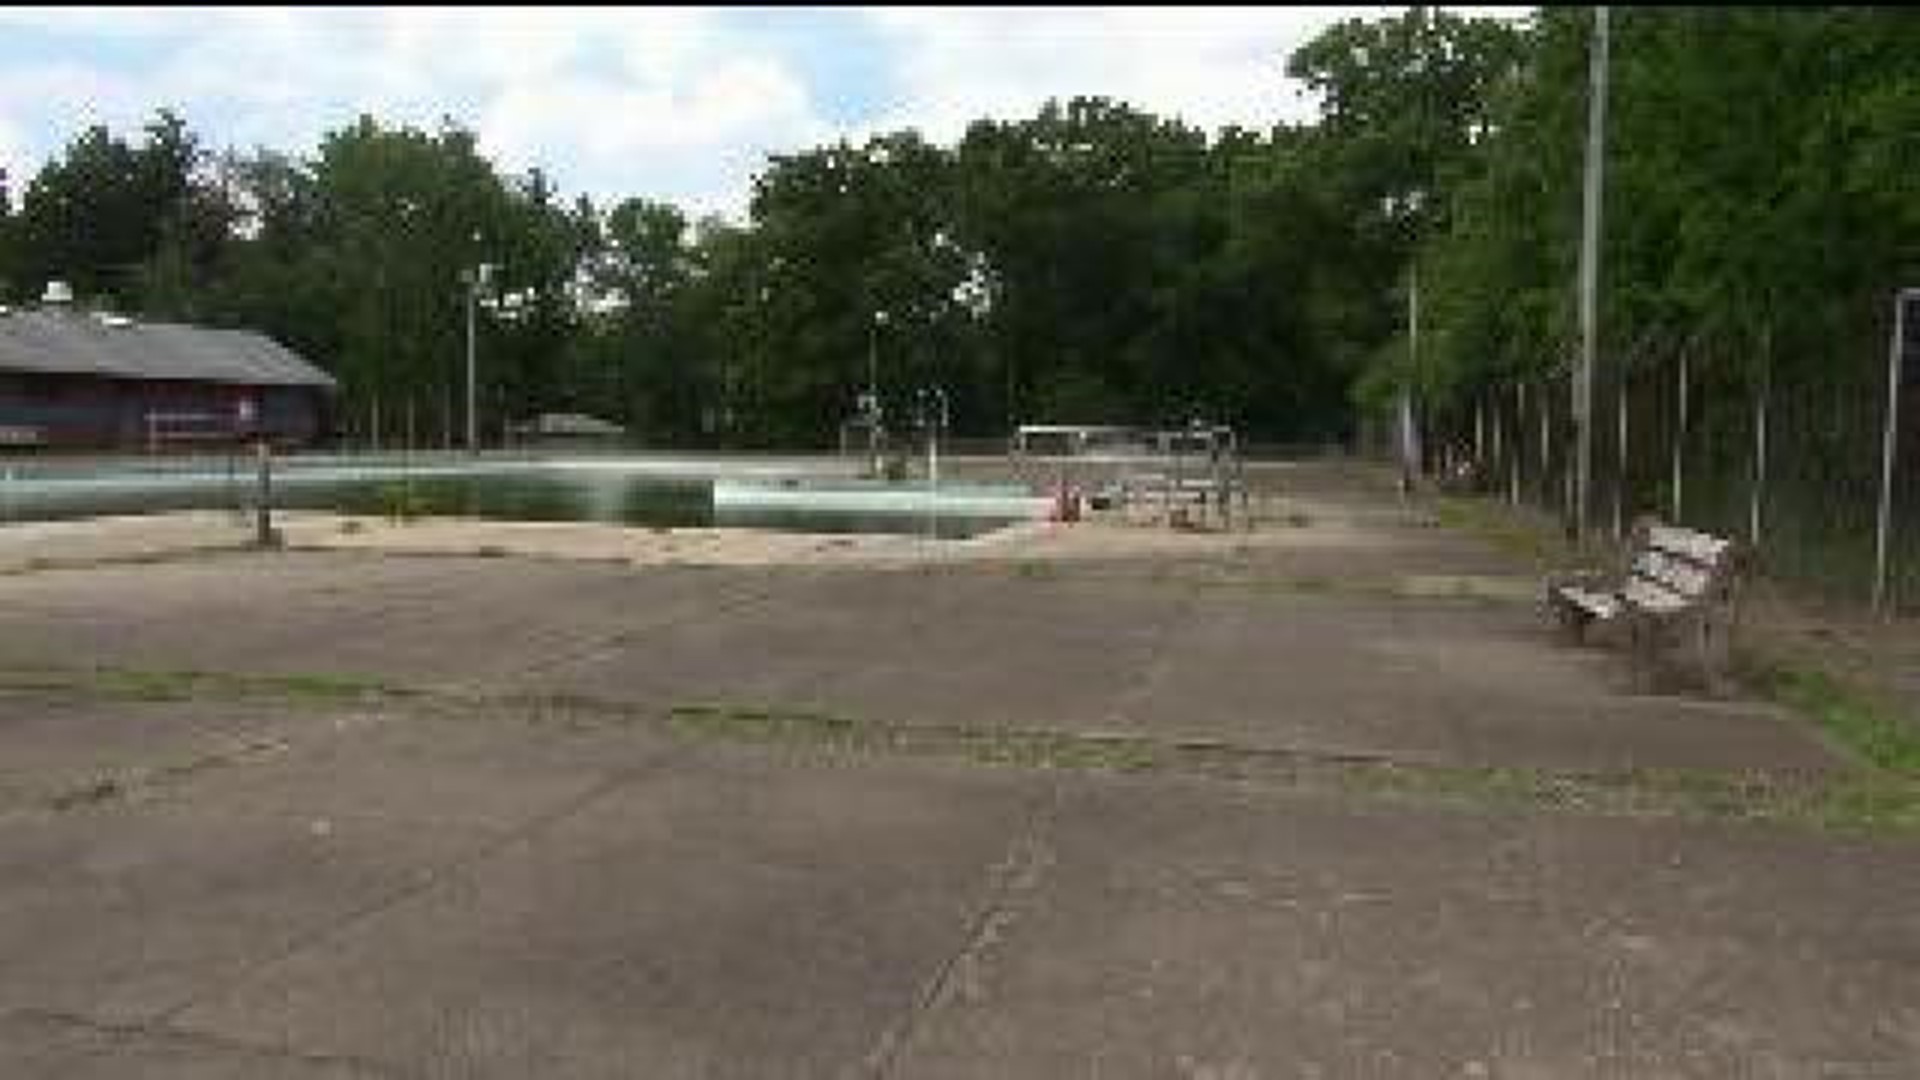 Community Rallies to Reopen Pool